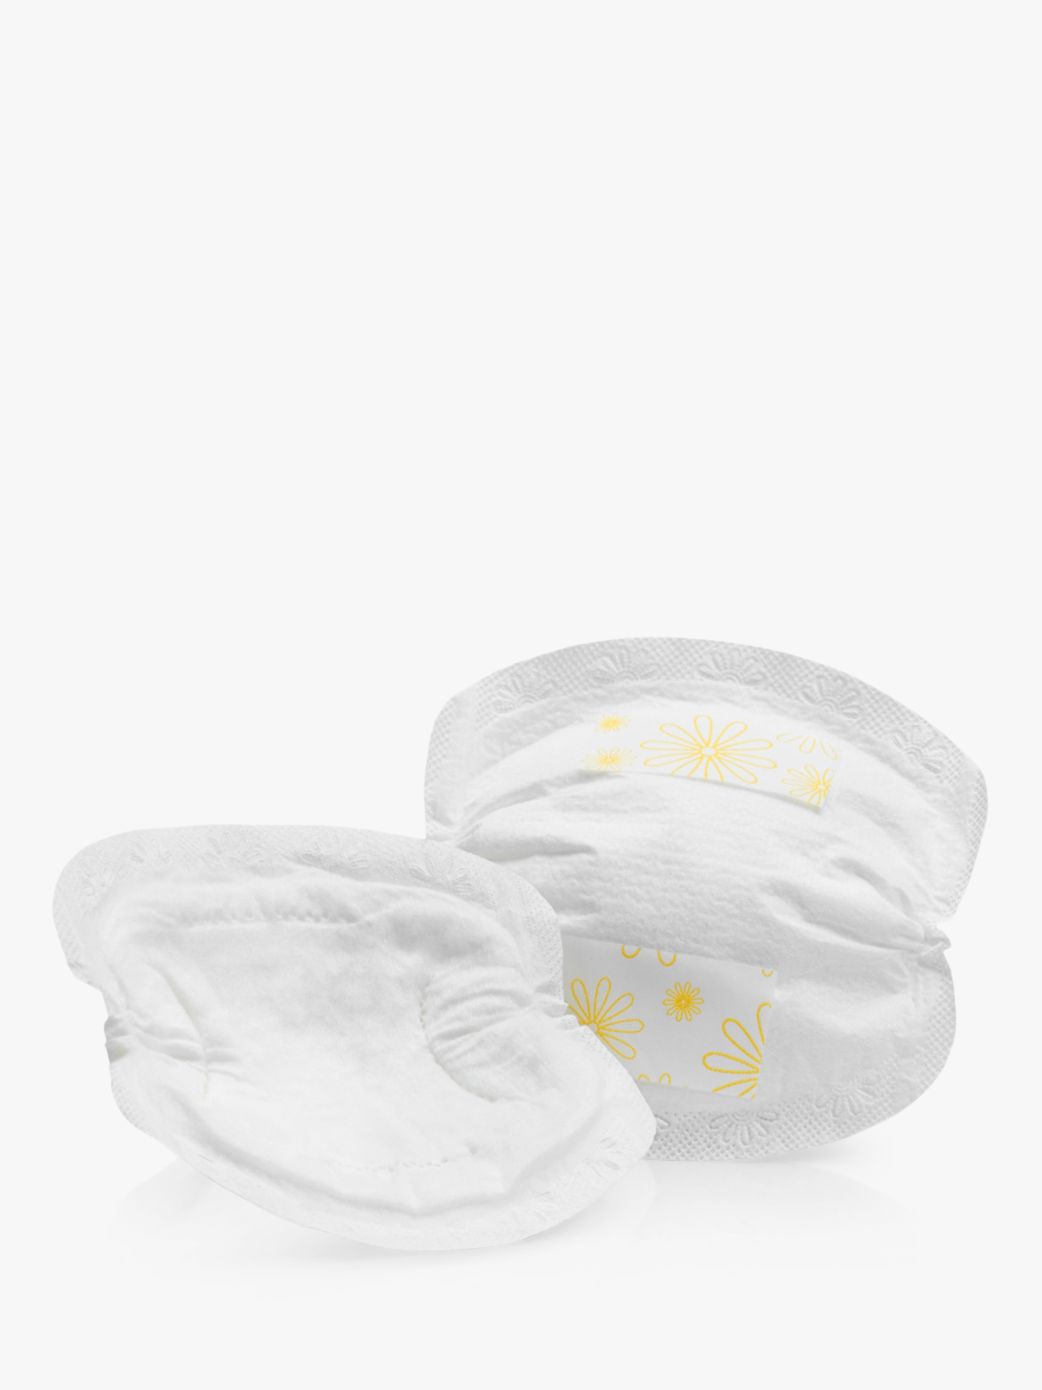 Image of Medela Disposable Breast Pads Pack of 60